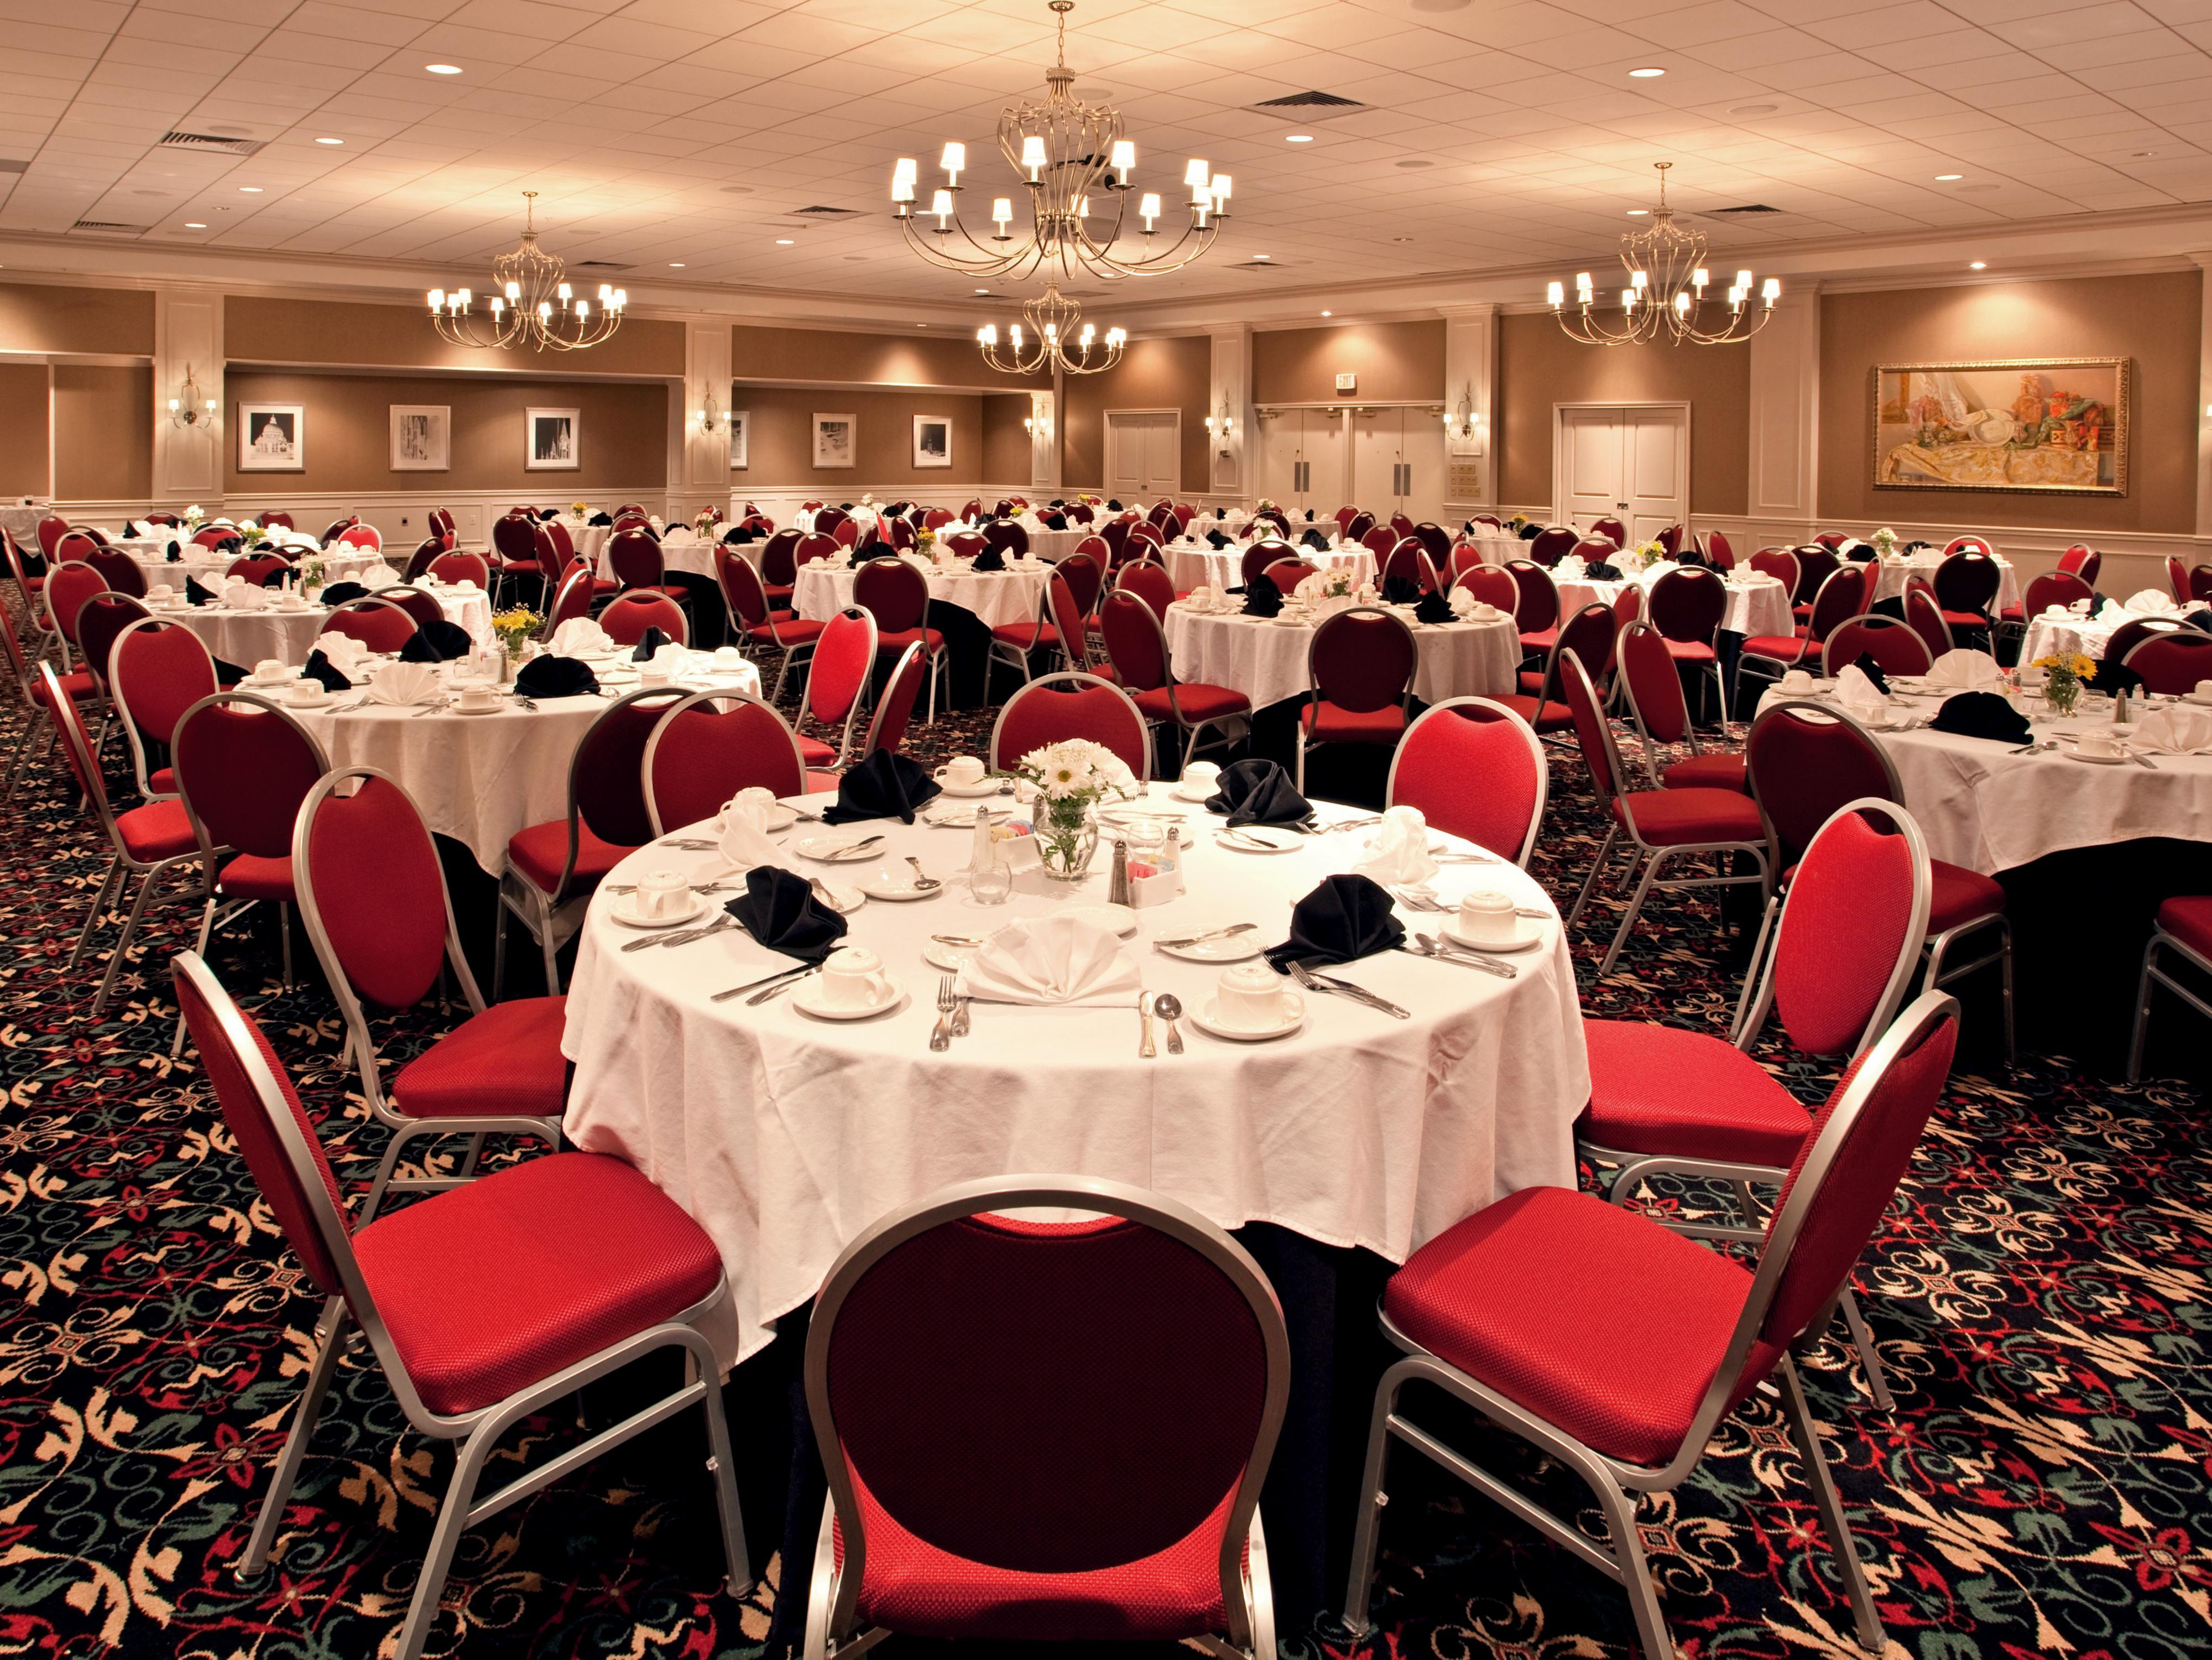 If you're looking for Johnstown, PA hotels with choice event facilities, check us out. We can host guests for banquets, conferences, receptions or meetings, and we provide audio/visual equipment, catering and free high-speed Internet access.